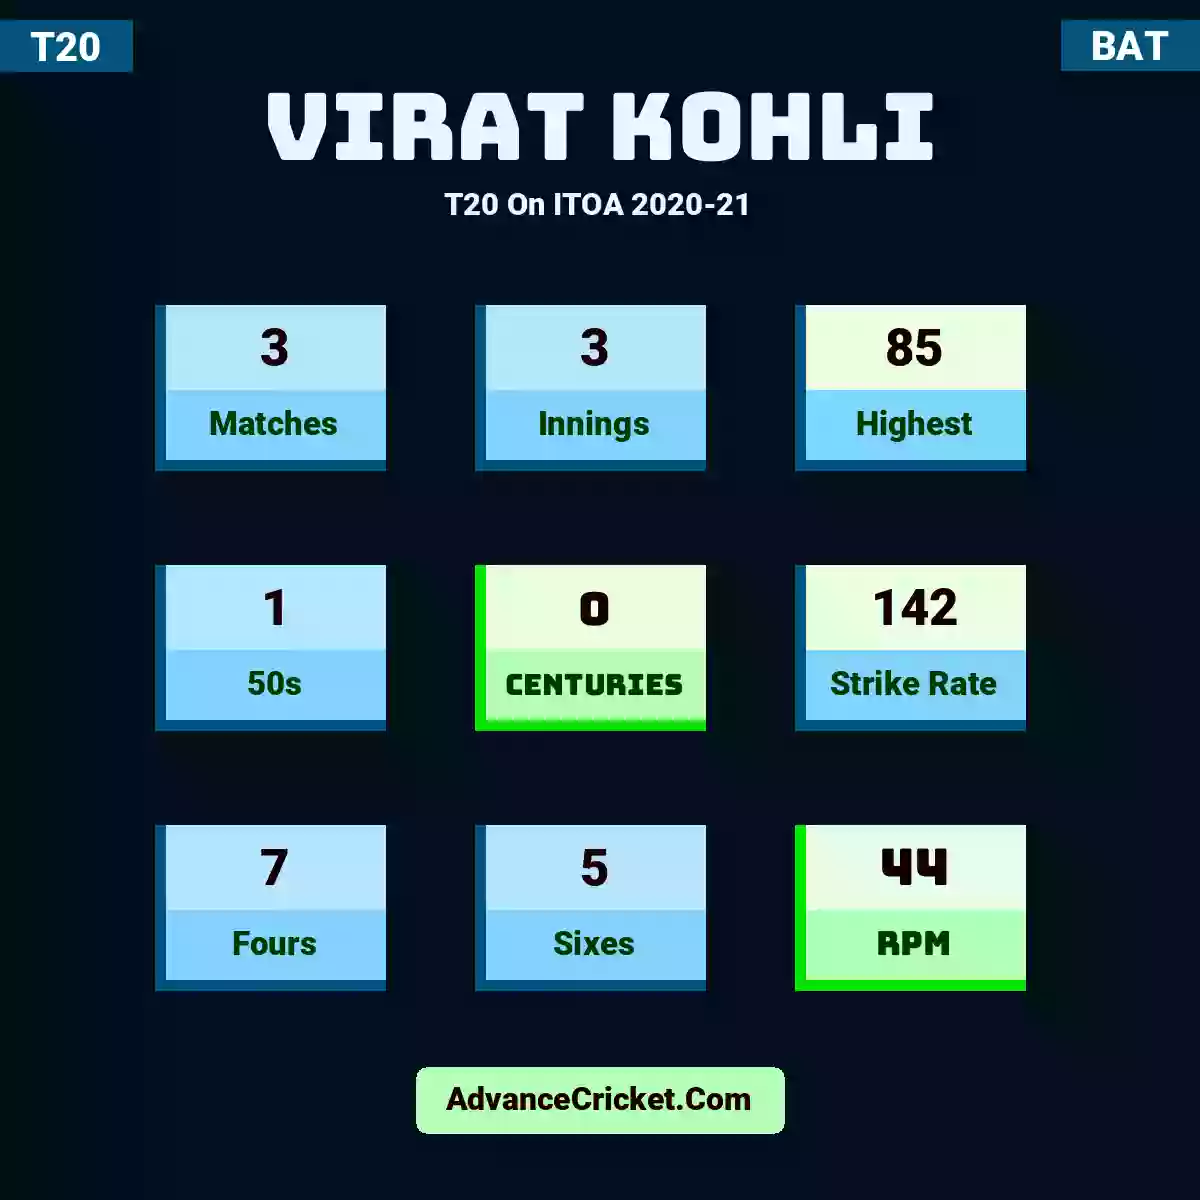 Virat Kohli T20  On ITOA 2020-21, Virat Kohli played 3 matches, scored 85 runs as highest, 1 half-centuries, and 0 centuries, with a strike rate of 142. V.Kohli hit 7 fours and 5 sixes, with an RPM of 44.